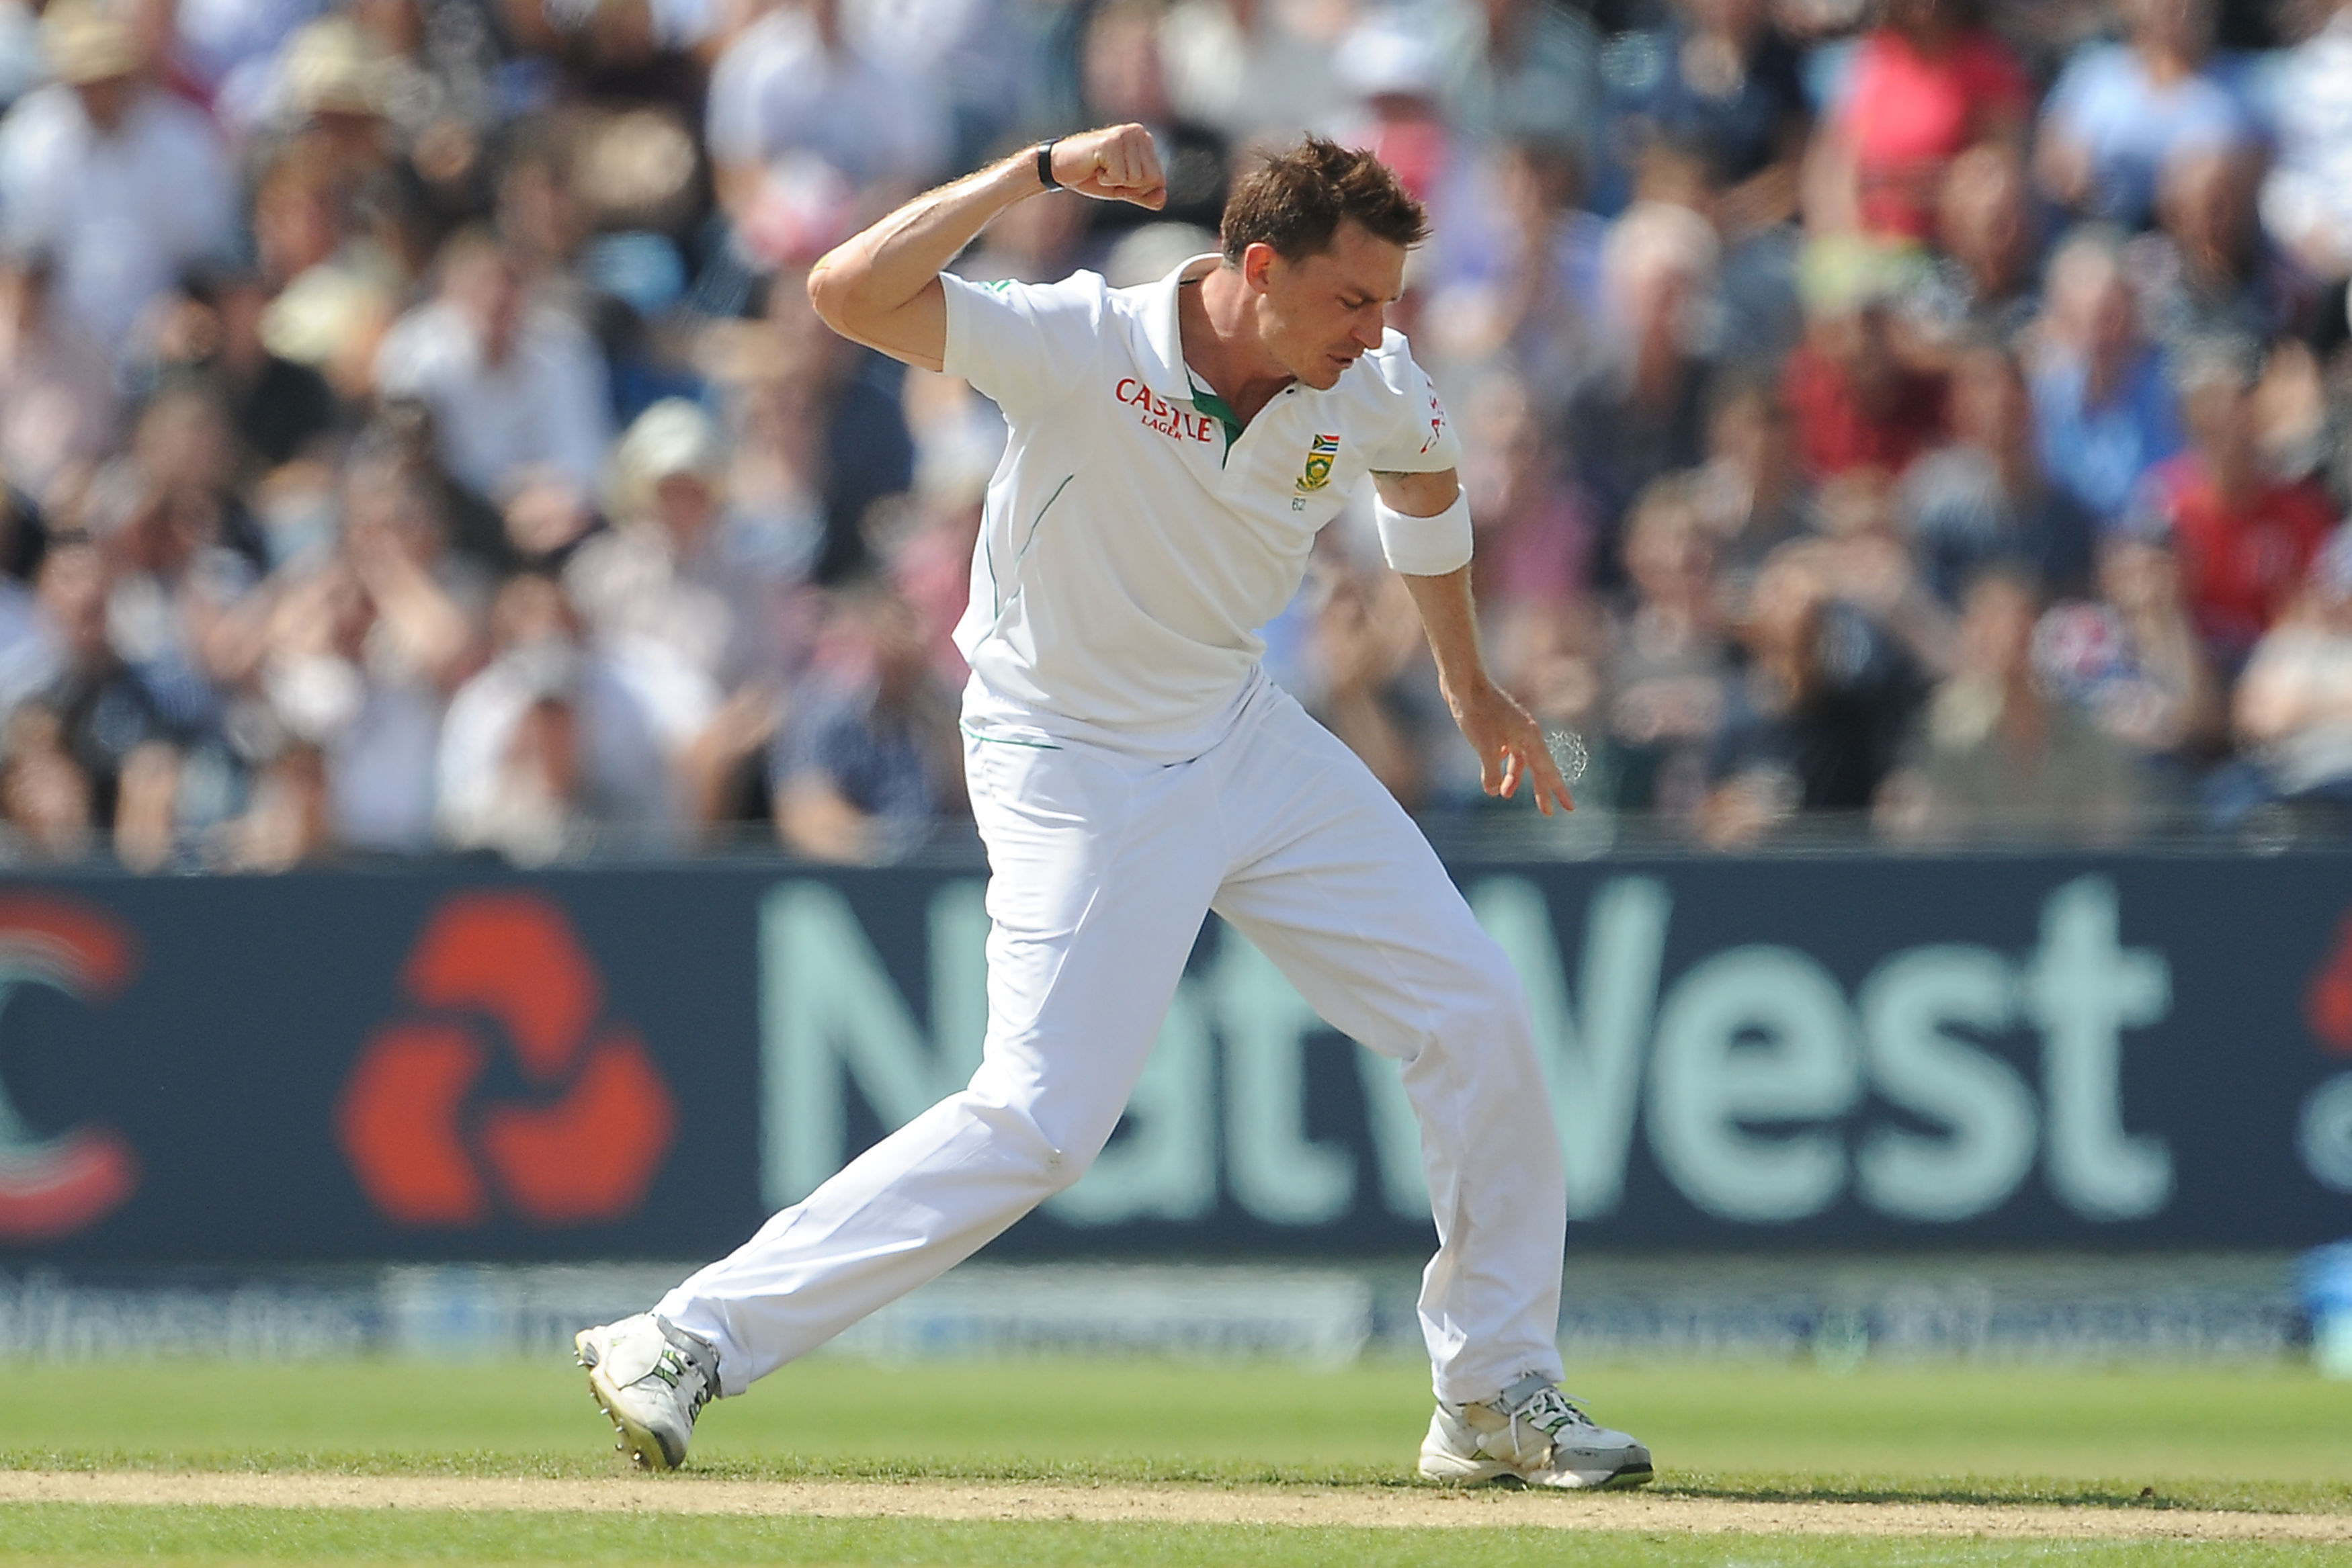 Turner grew up idolising former South Africa quick Dale Steyn, pictured (PA)